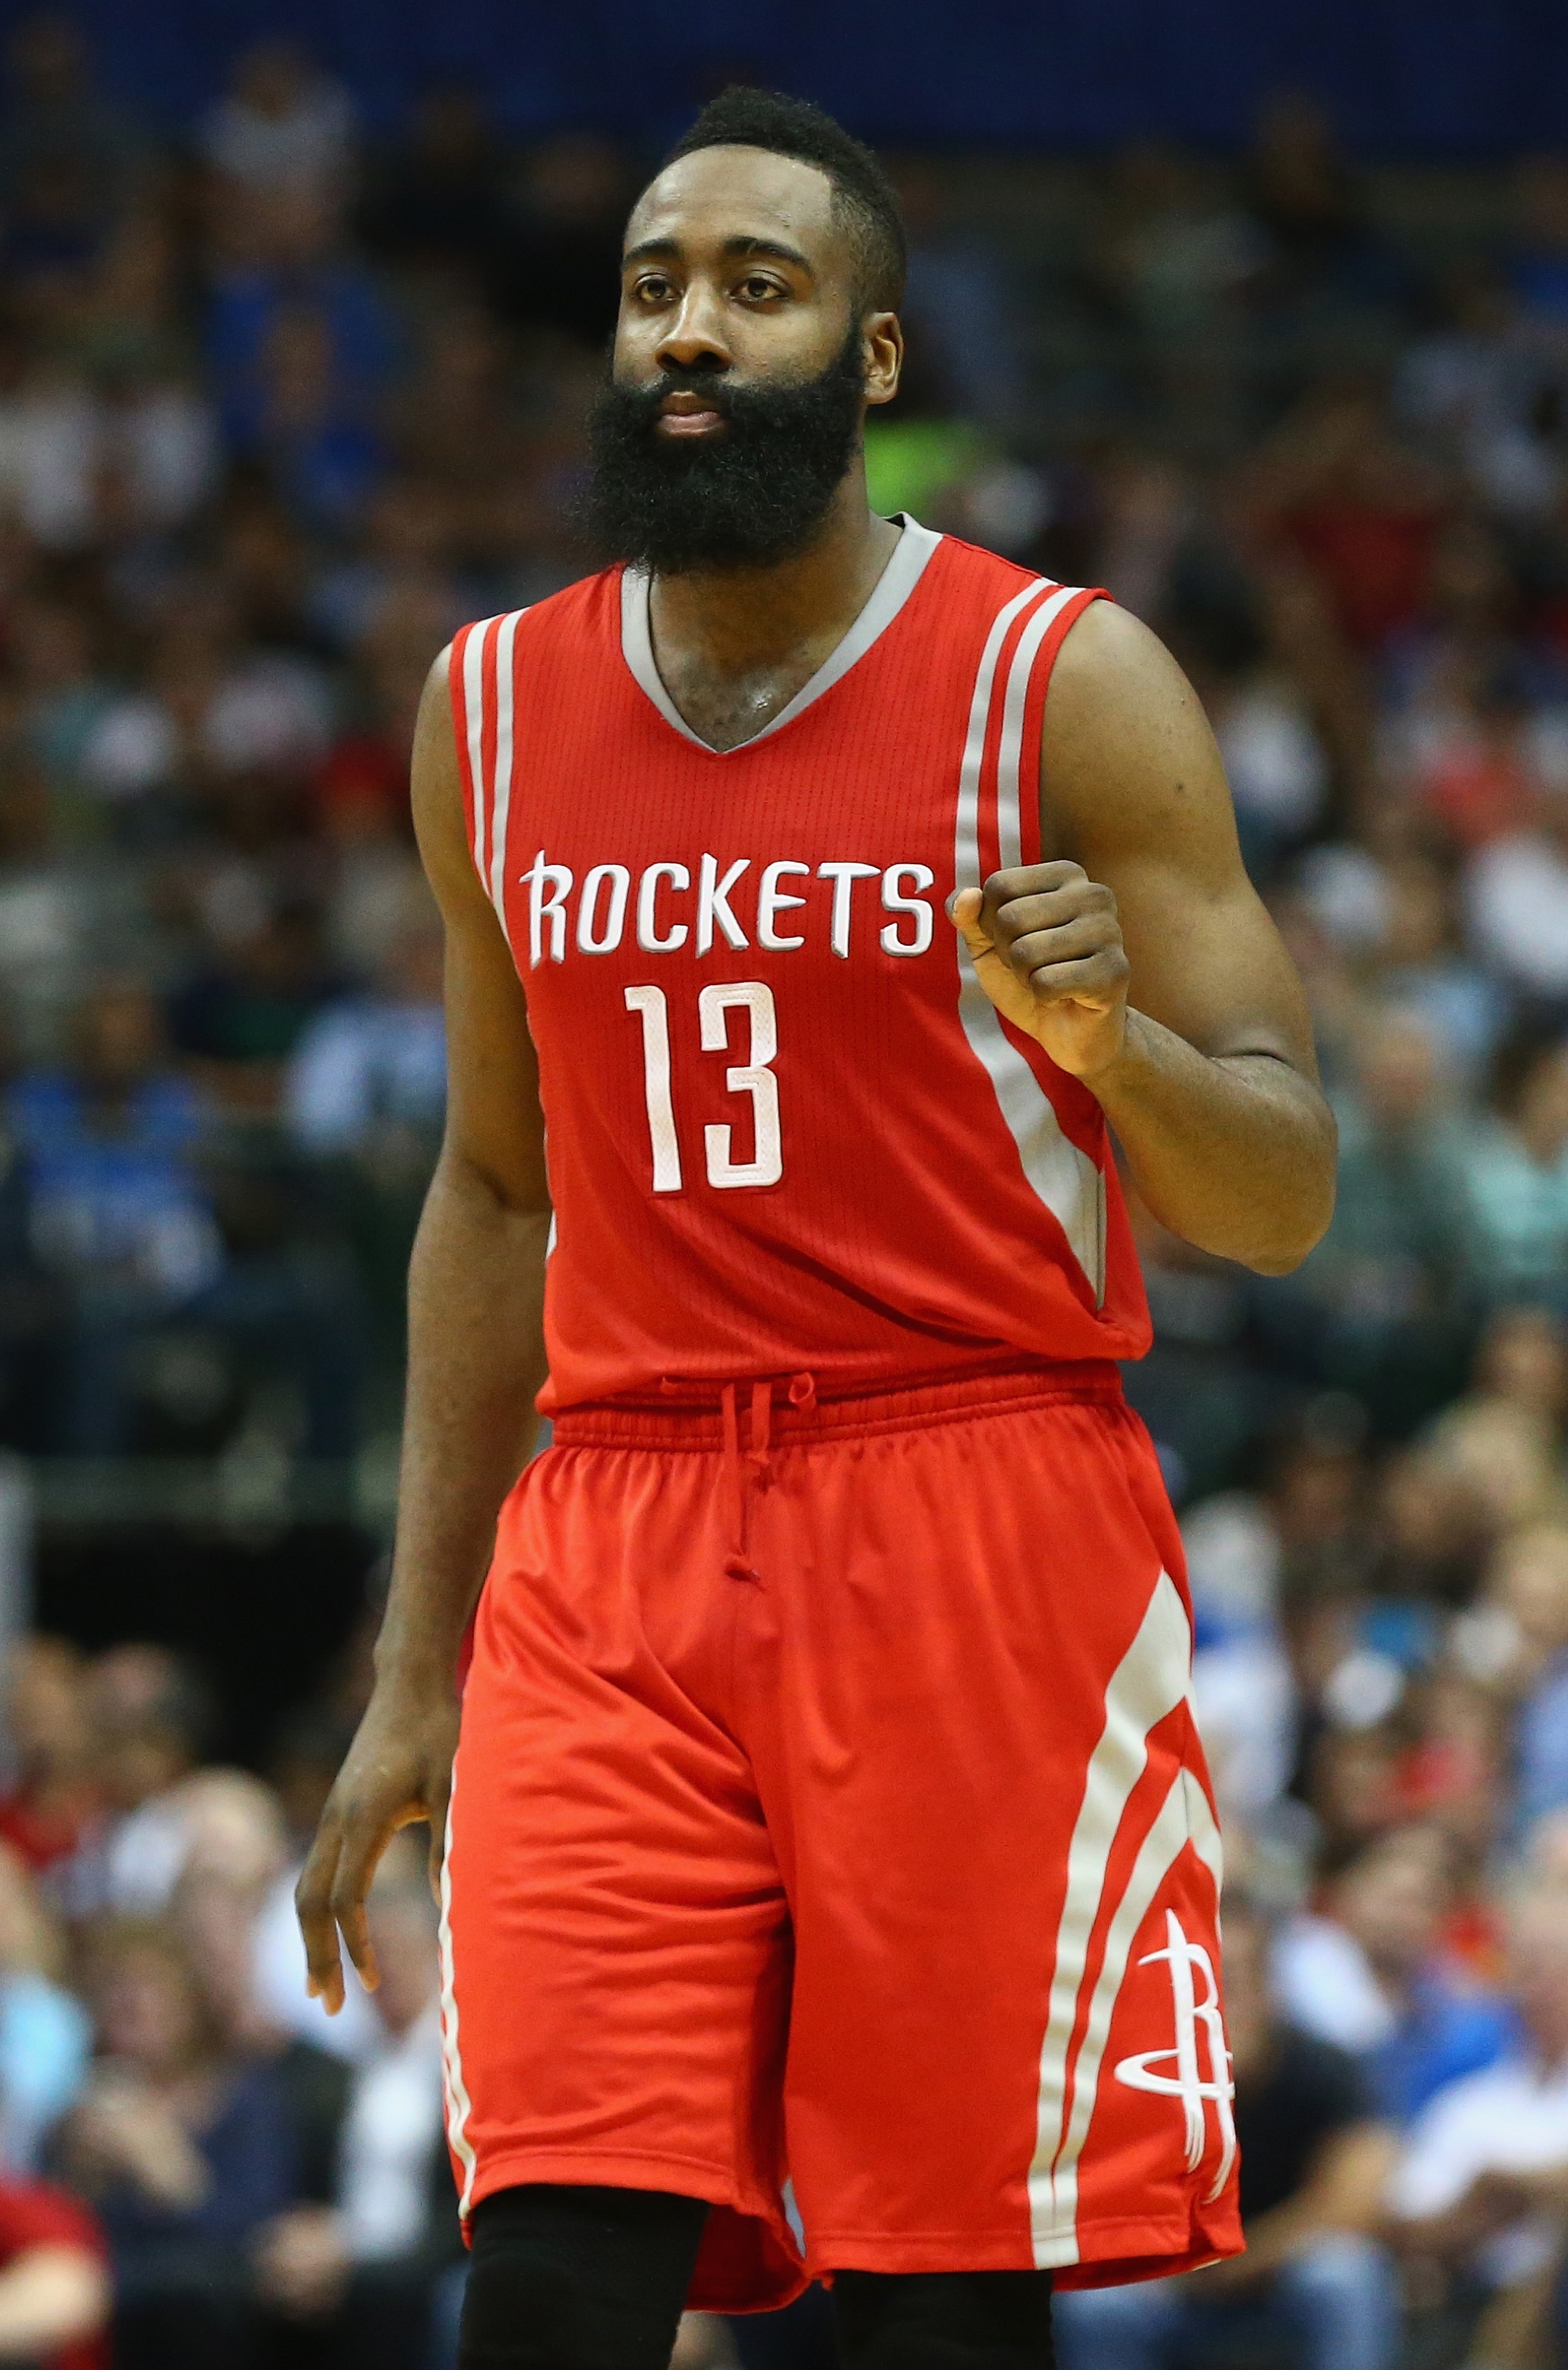 DALLAS, TX - APRIL 02: James Harden #13 of the Houston Rockets reacts during play against the Dallas Mavericks at American Airlines Center on April 2, 2015 in Dallas, Texas. NOTE TO USER: User expressly acknowledges and agrees that, by downloading and or using this photograph, User is consenting to the terms and conditions of the Getty Images License Agreement. (Photo by Ronald Martinez/Getty Images)